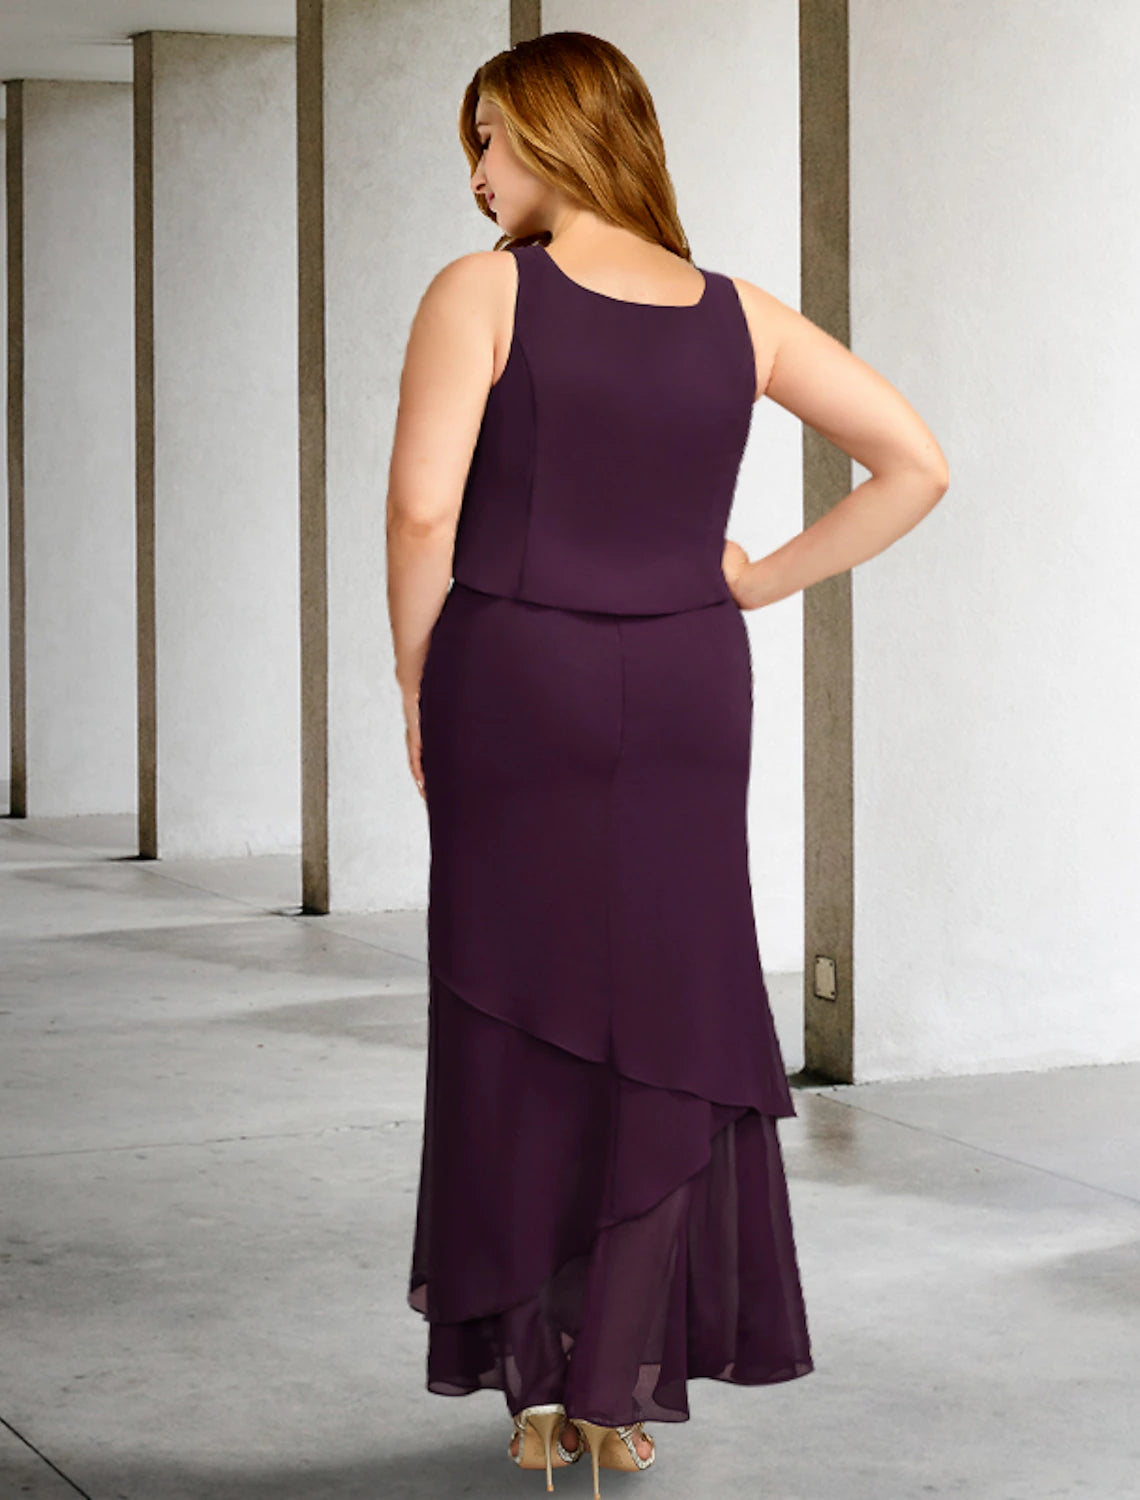 Two Piece A-Line Mother of the Bride Dresses Plus Size Hide Belly Curve Elegant Dress Formal Ankle Length Sleeveless Square Neck Chiffon with Beading Ruffles